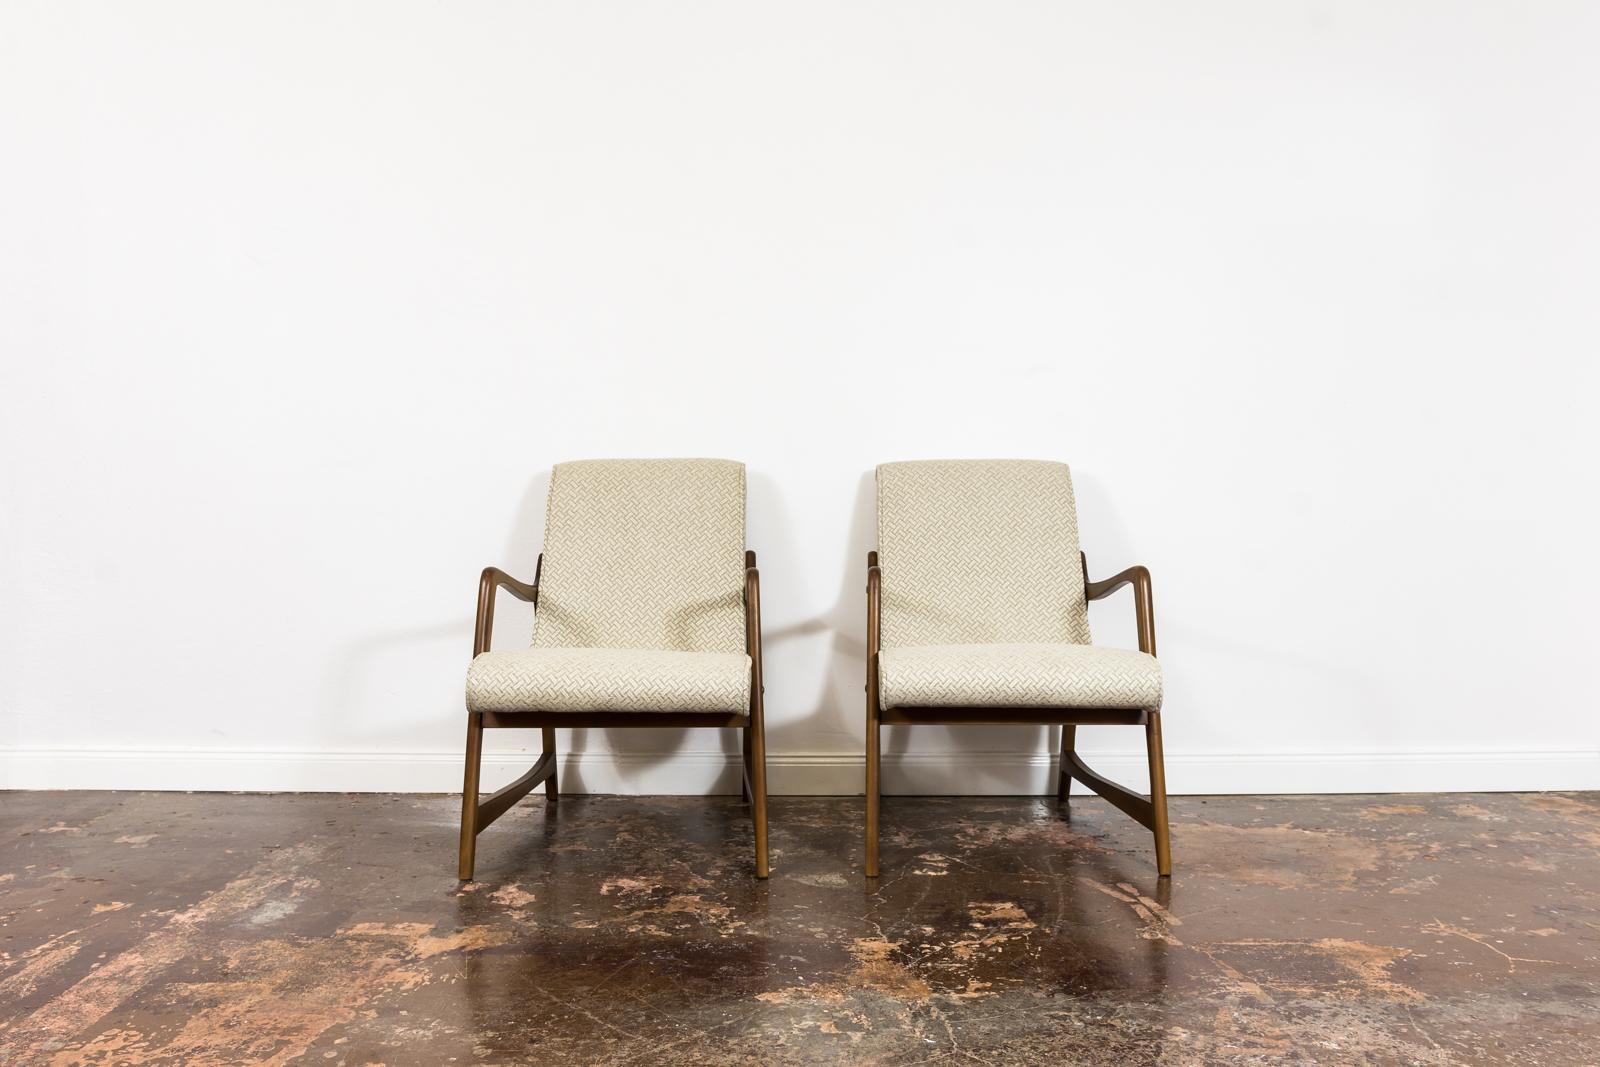 Pair of armchairs 364 by Barbara Fenrych Weclawska, 1960s, Poland.
Completely restored.